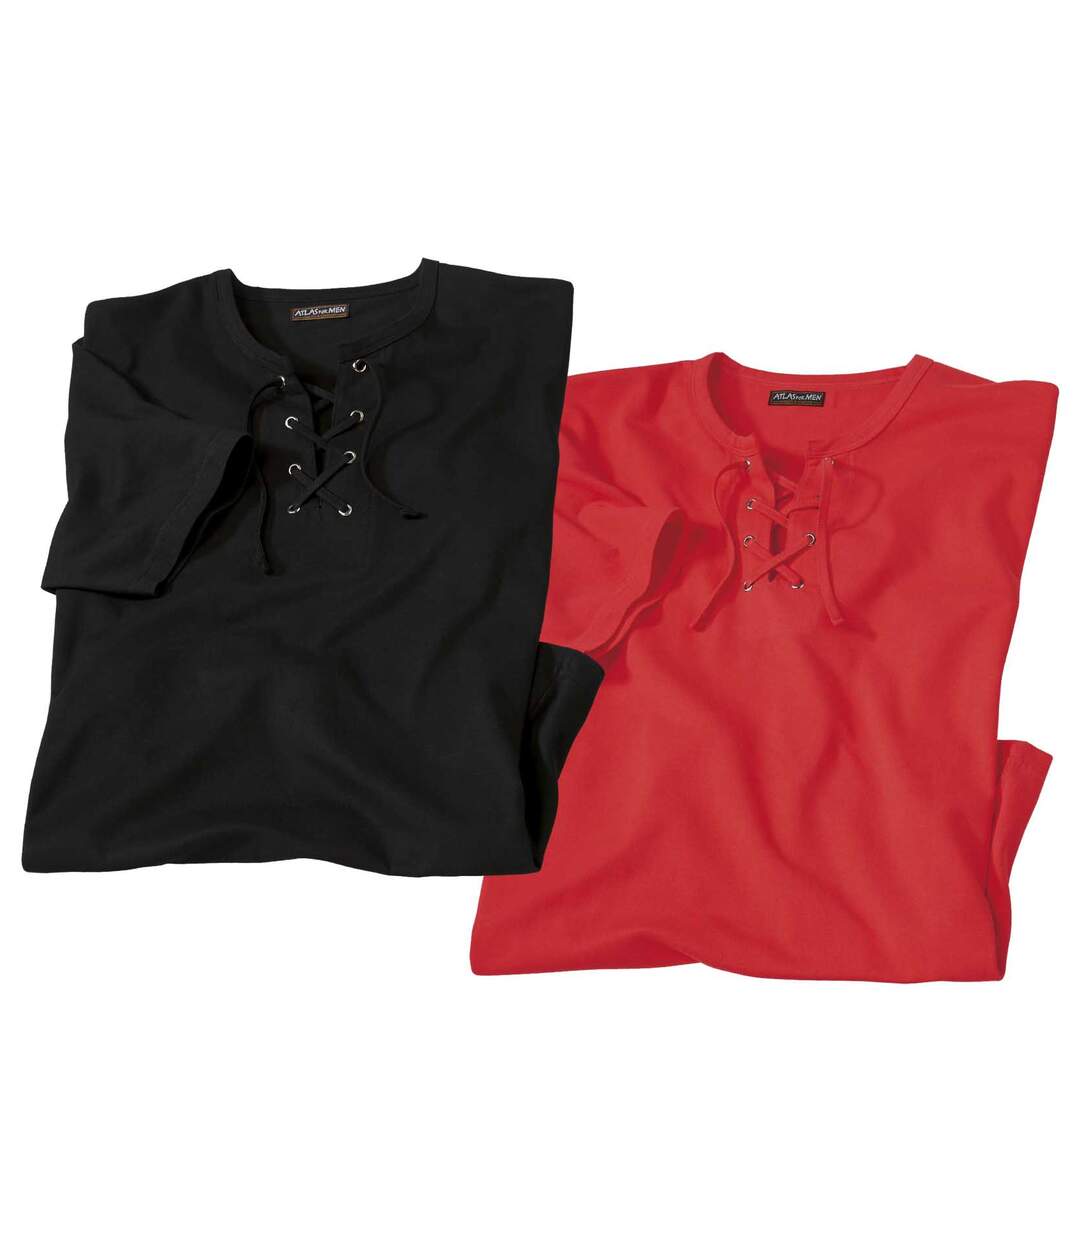 Pack of 2 Men's Summer Lace-Up T-Shirts - Black and Coral Atlas For Men